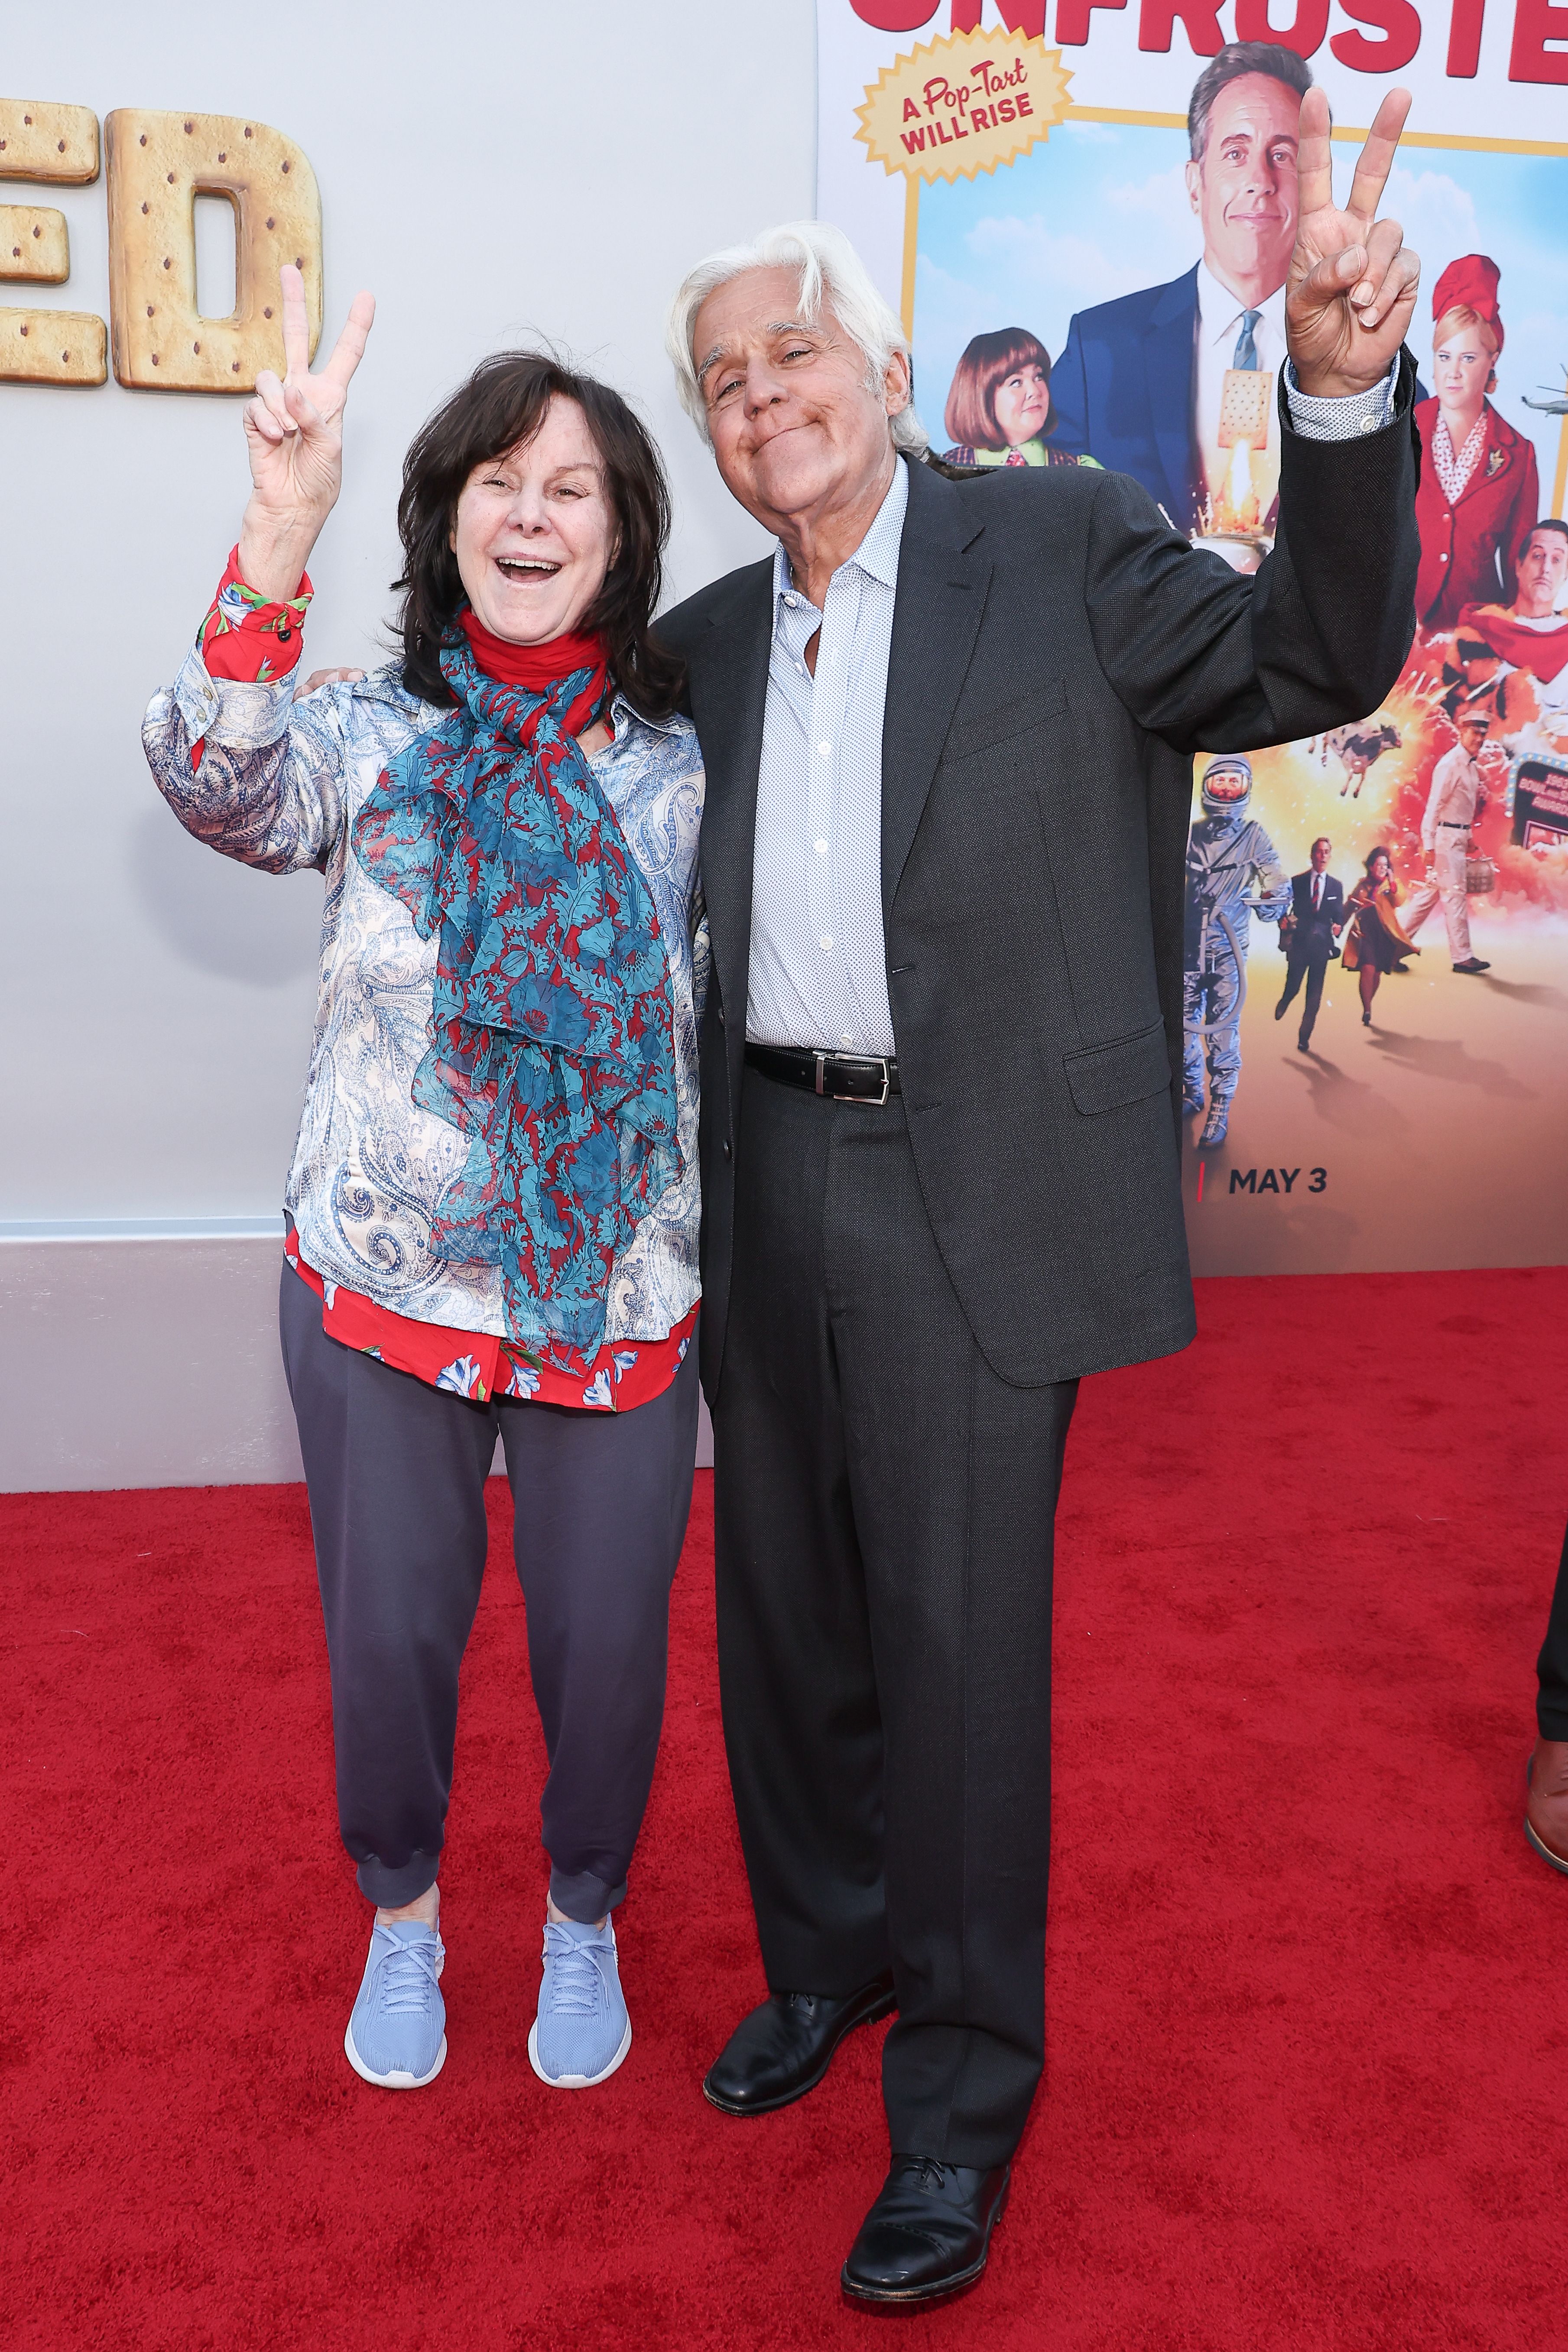 The couple, who have been married for over four decades, were seen in good spirits as they smiled and posed on the red carpet